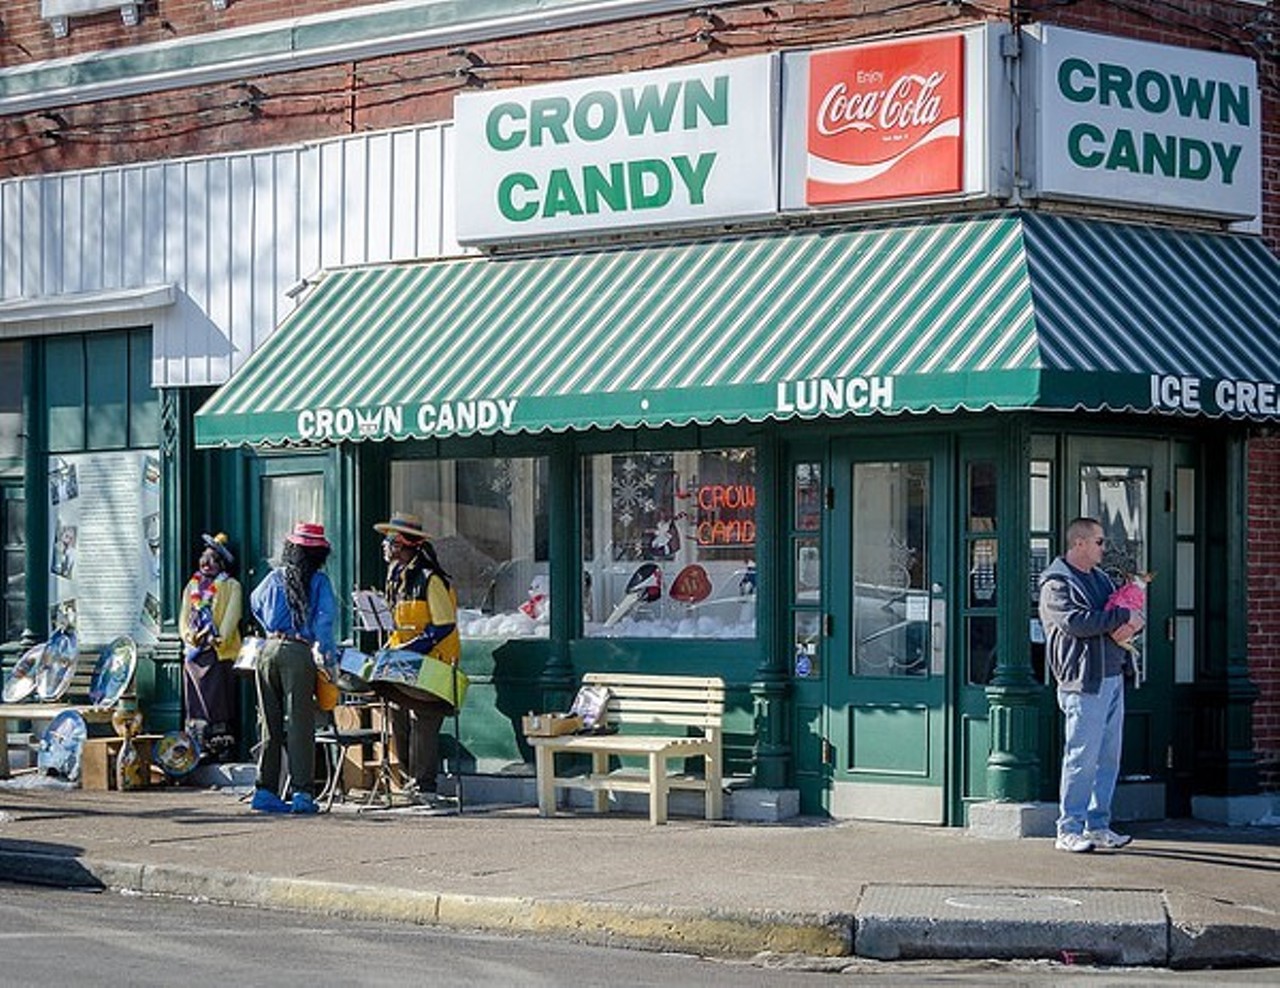 Crown Candy Kitchen
1401 St. Louis Ave.
The beloved candy shop and soda fountain was founded in 1913 and has stayed in the same family and in the same building ever since. This St. Louis institution is famous for its candies, its malts and its "Heart Stoping BLT"s.
Photo courtesy of Keith Yahl